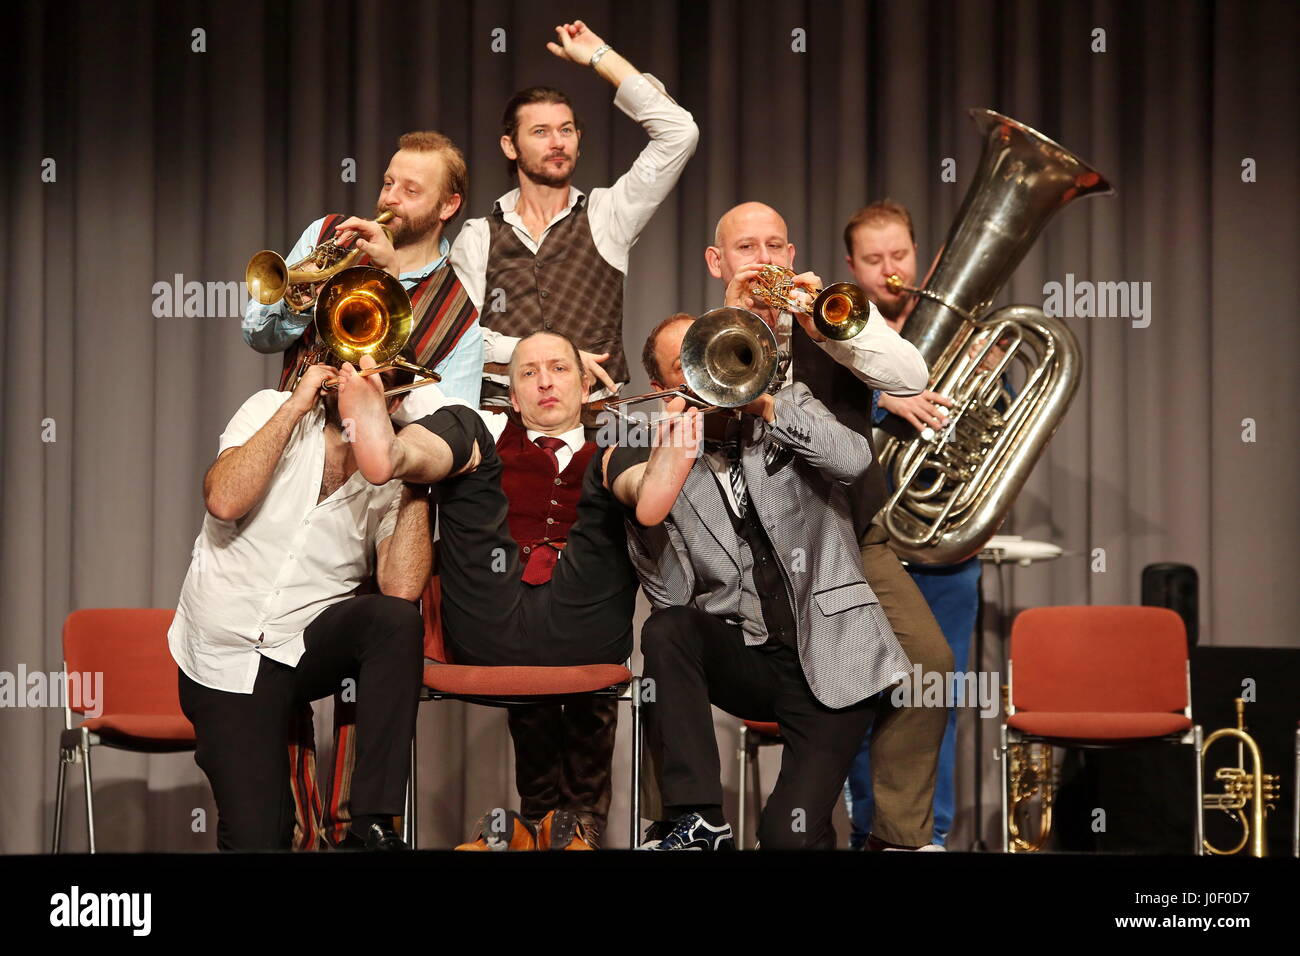 Mnozil Brass, Austrian brass septet, concert and music comedy program 'Yes, Yes, Yes', Kongresshalle Giessen/Germany, 20th January 2017 - in picture: Leonhard Paul (mid, on chair) plays with fingers and feeds the valves of the other musicians's trumpets and trombones. Fotocredit: Christian Lademann Stock Photo